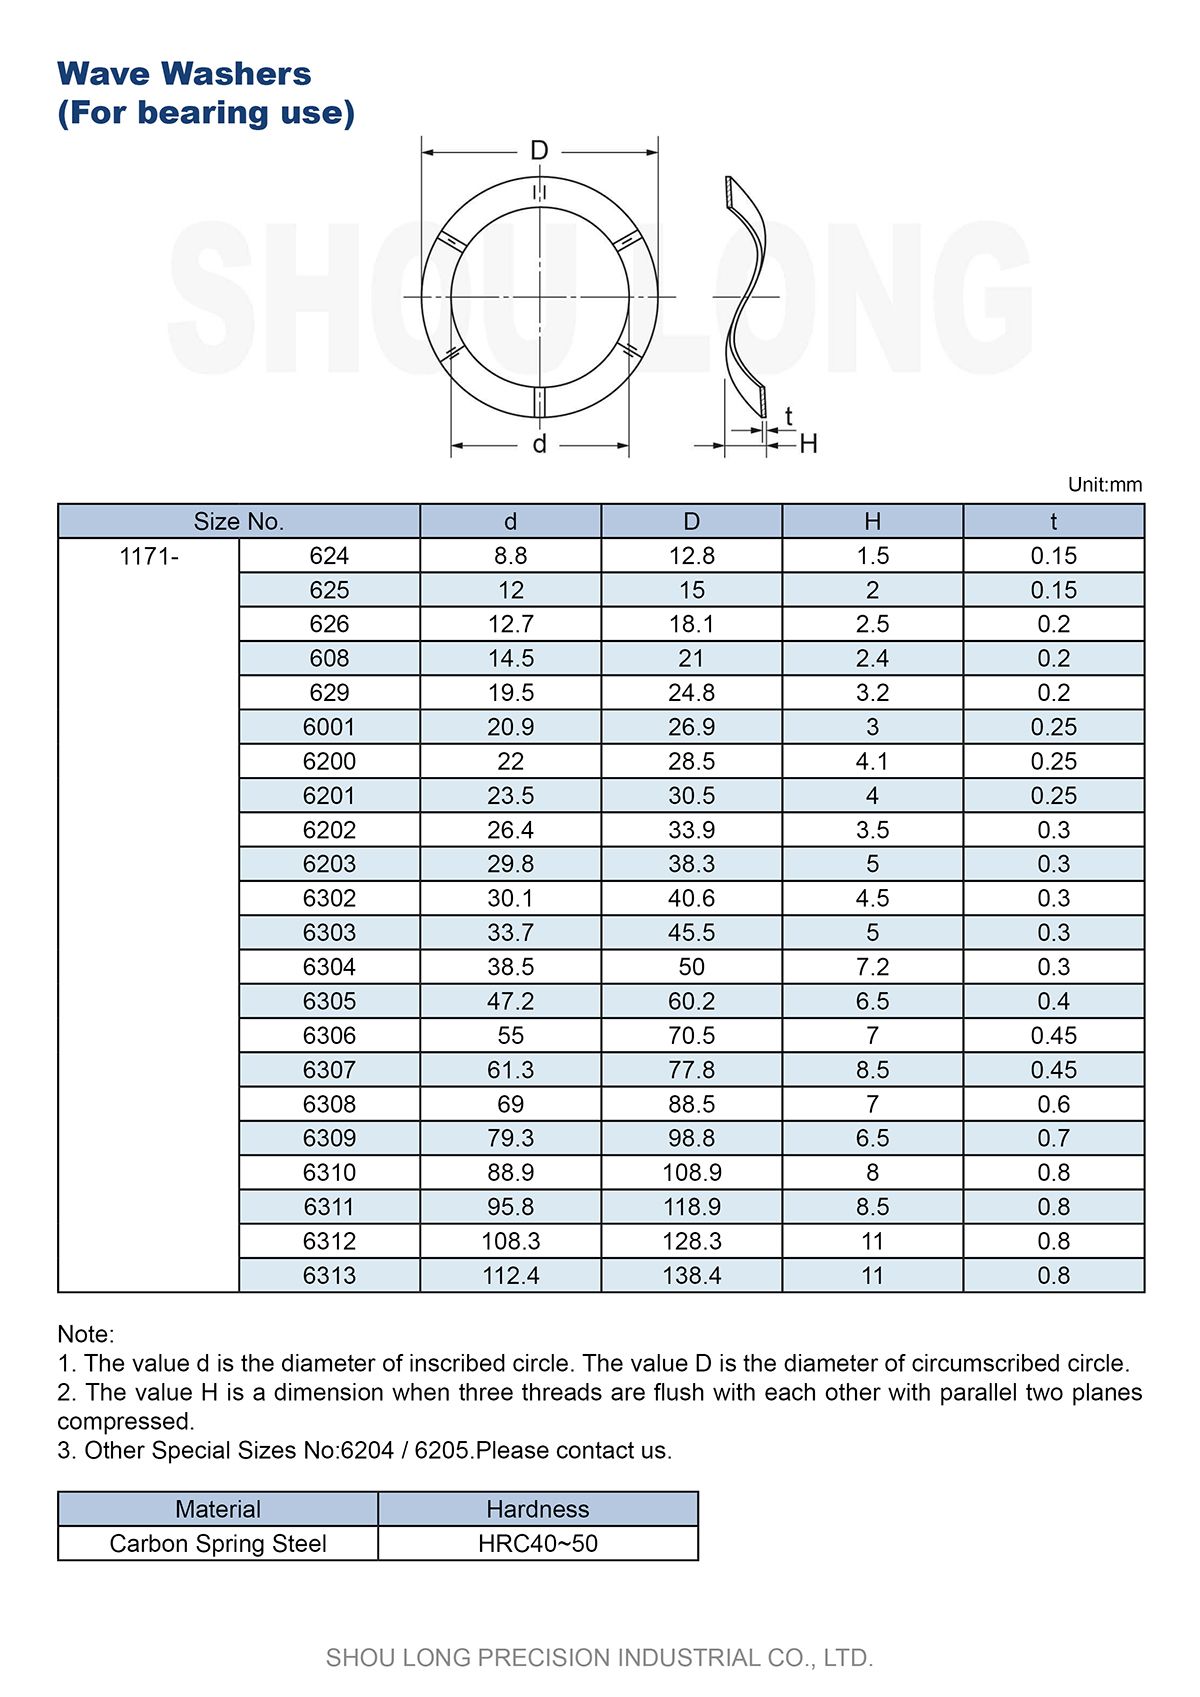 Spec of JIS Metric Wave Washers for Bearing Use